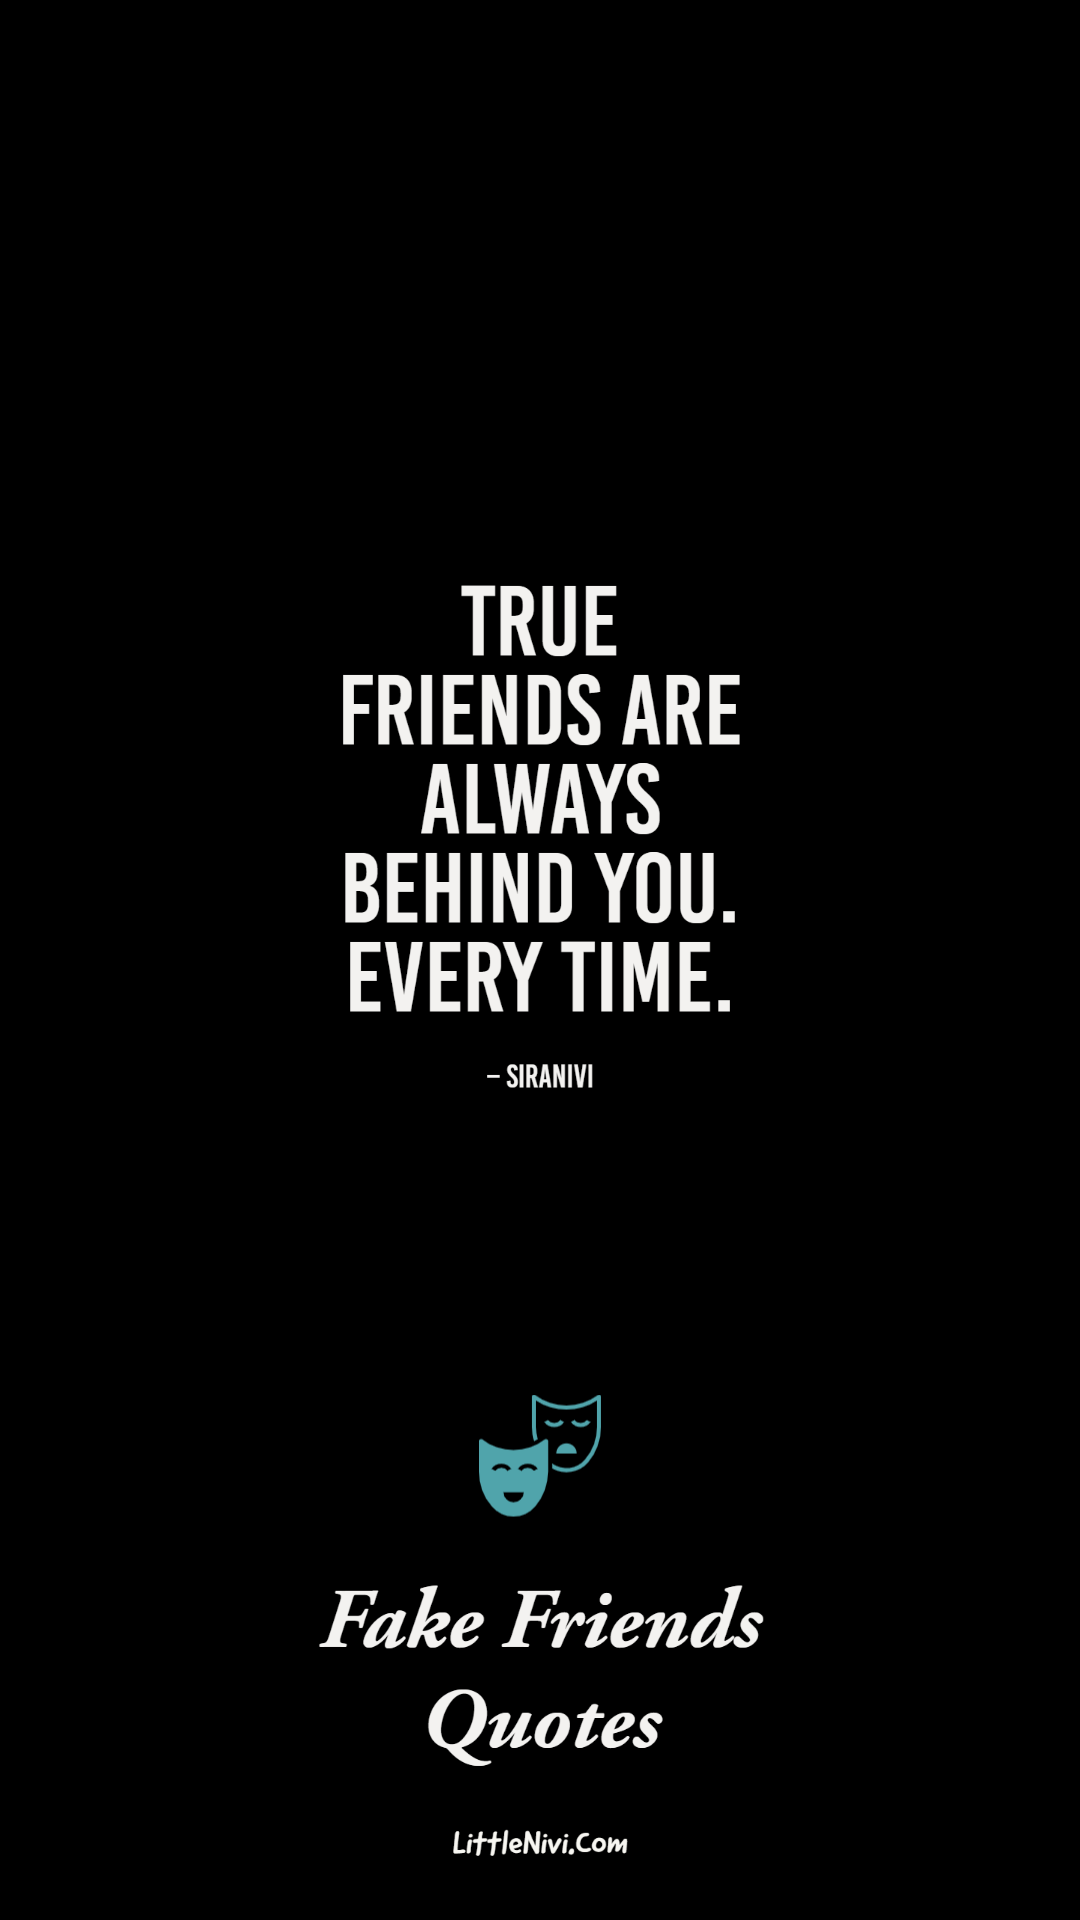 awesome fake friends quotes and images